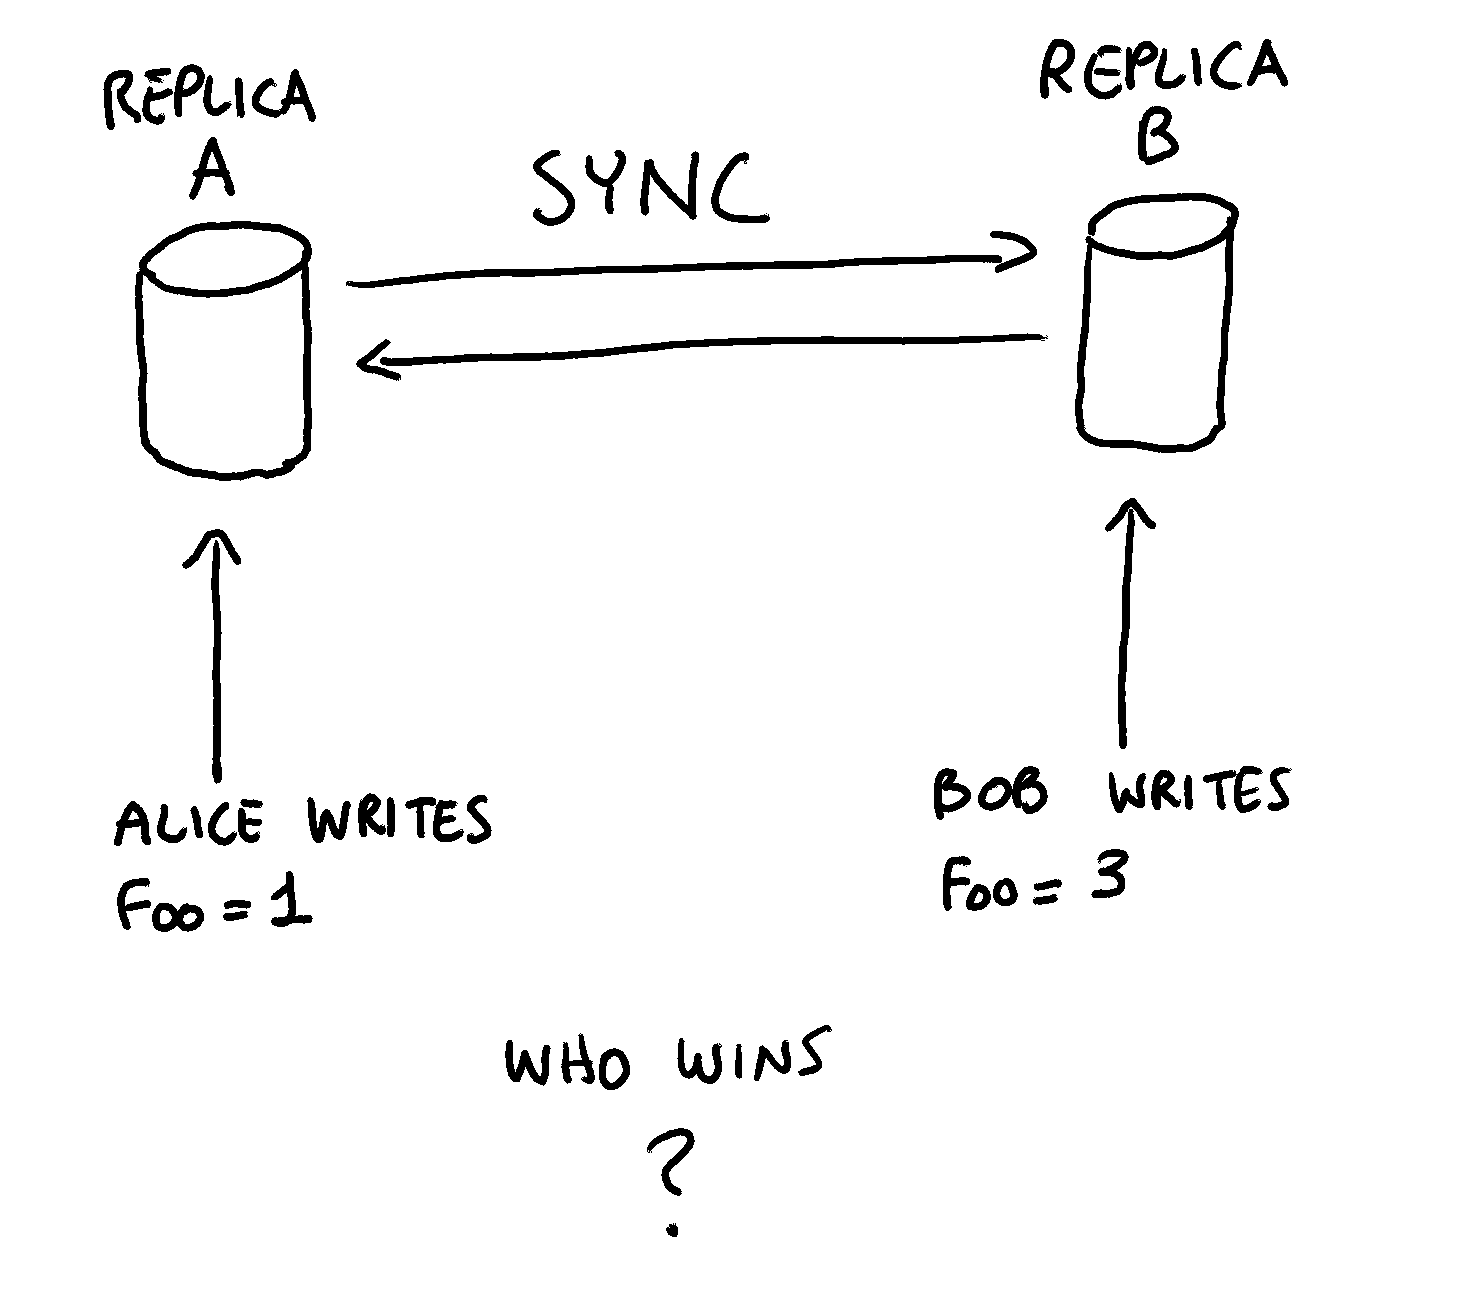 Example of a concurrent write across different replicas.